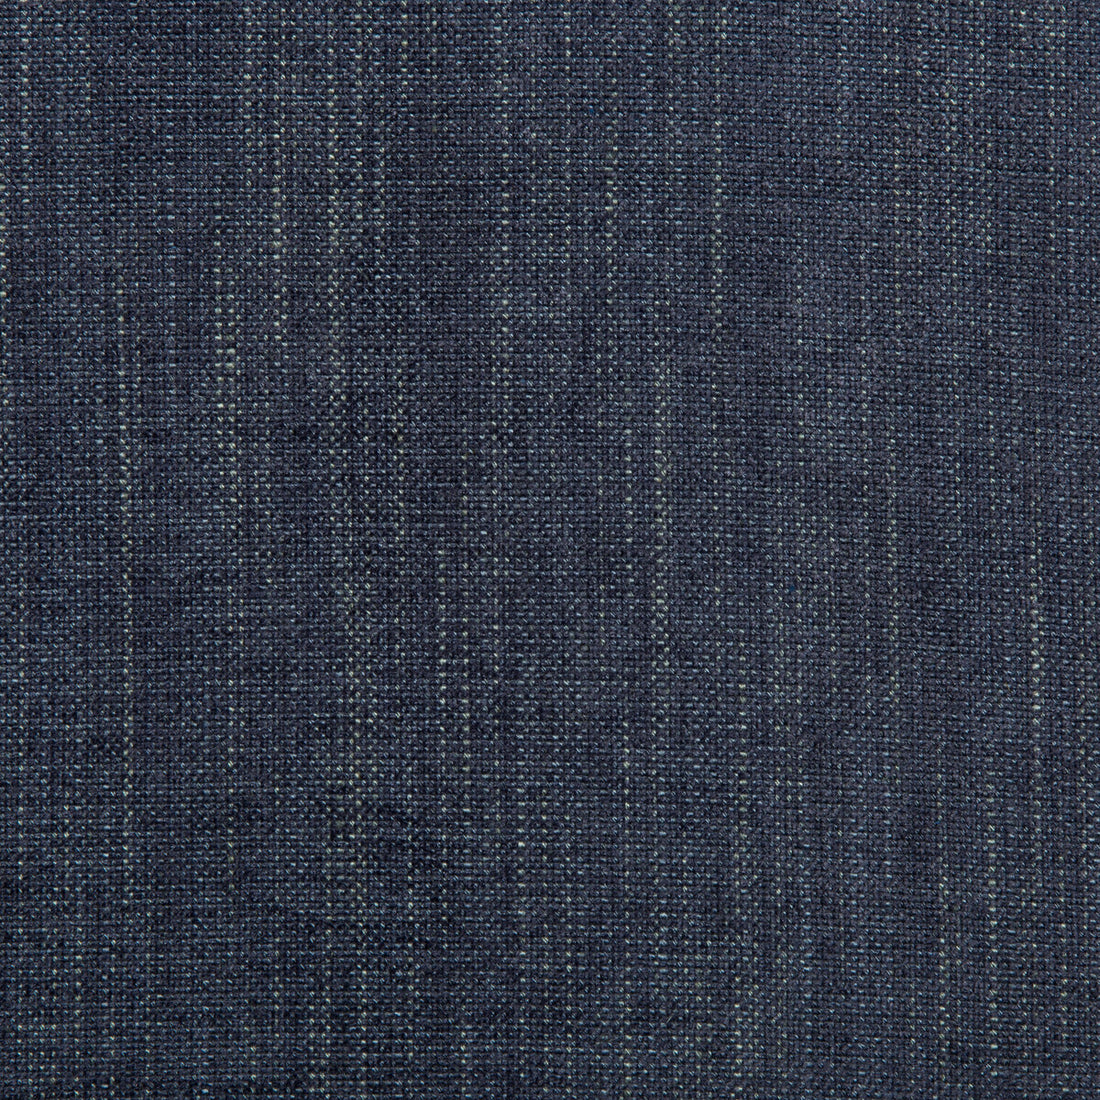 Carbon Texture fabric in azure color - pattern 35507.50.0 - by Kravet Design in the Barclay Butera Sagamore collection